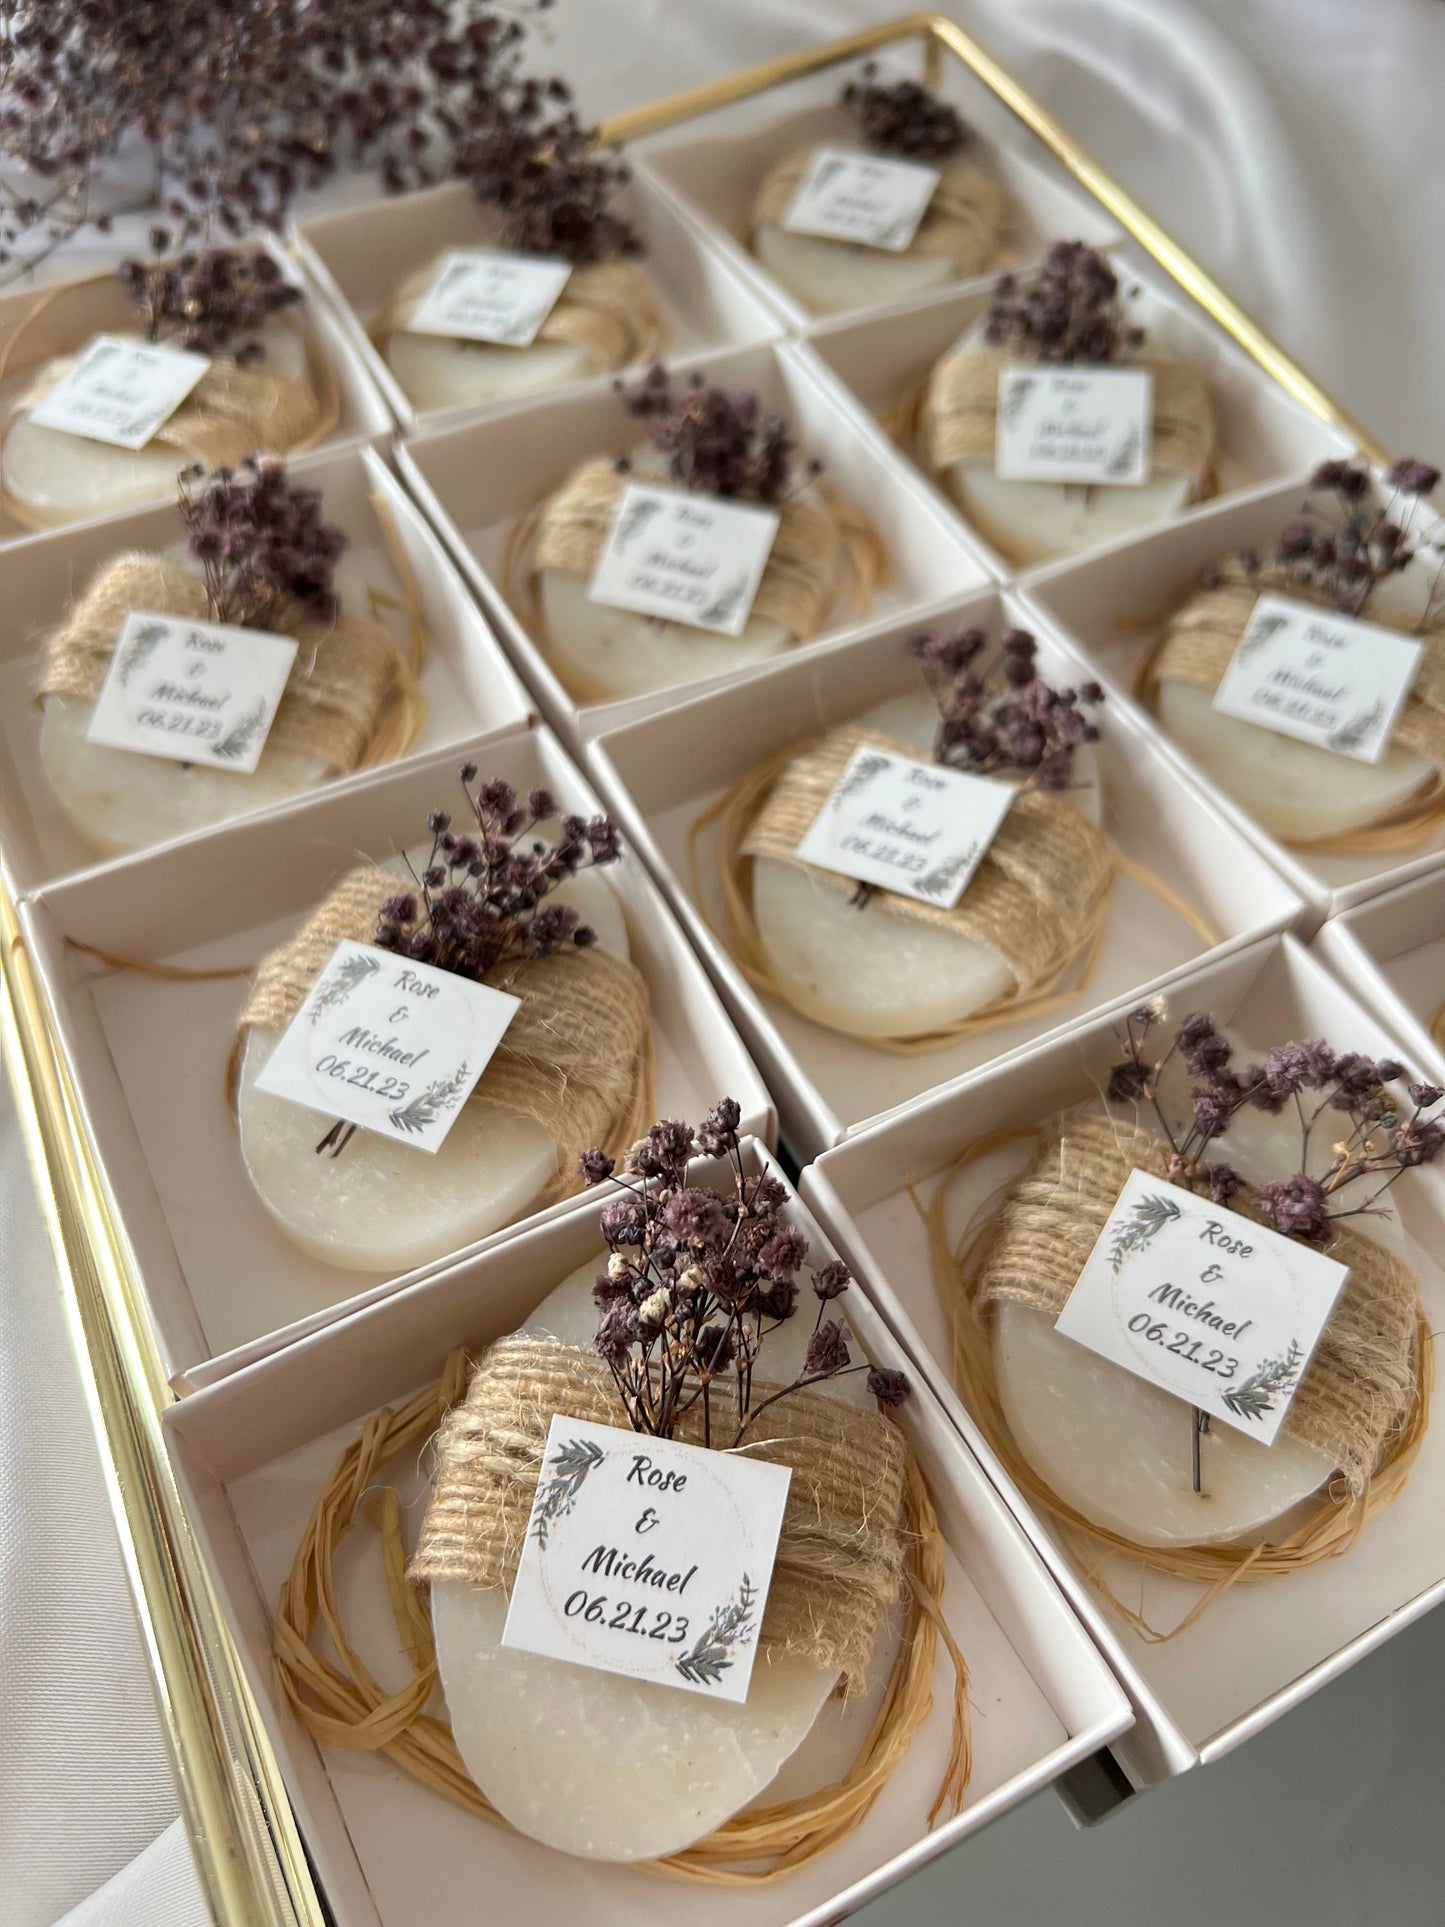 Wedding soap gifts | Wedding soap favors | Soap party favors for guests | Bridal shower favors in bulk